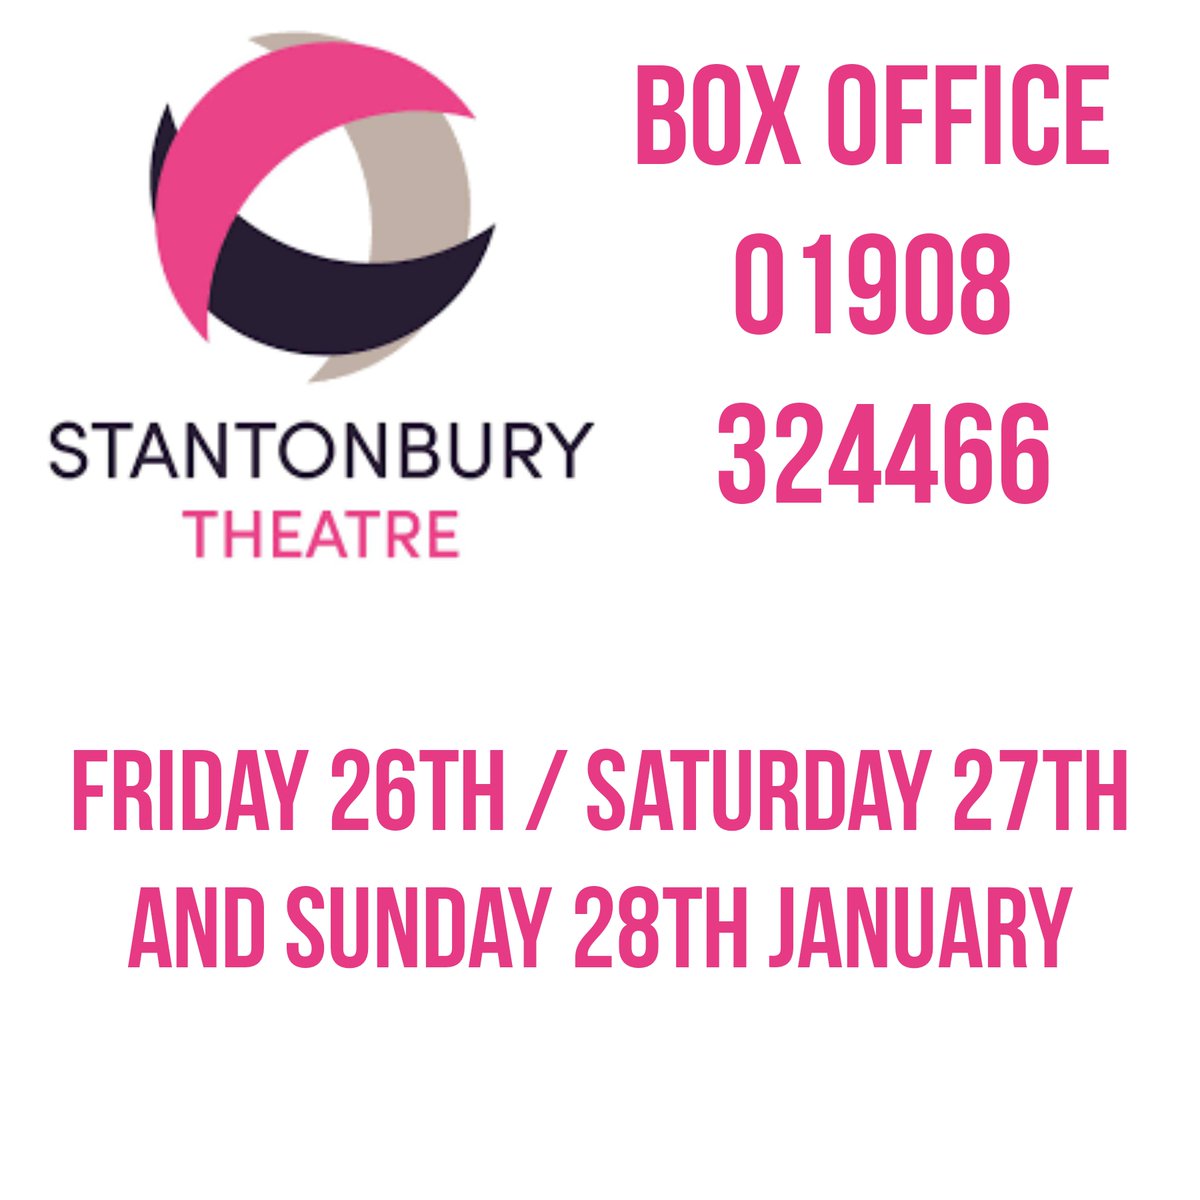 Not one, not two but three yes that's right THREE nights are coming up in Milton Keynes and we cannot wait to return. Book Tickets: stantonburytheatre.ticketsolve.com/ticketbooth/sh… Box Office: 01908 324466. #miltonkeynes #beegeestributeshow @SCTheatre1 @My_MiltonKeynes